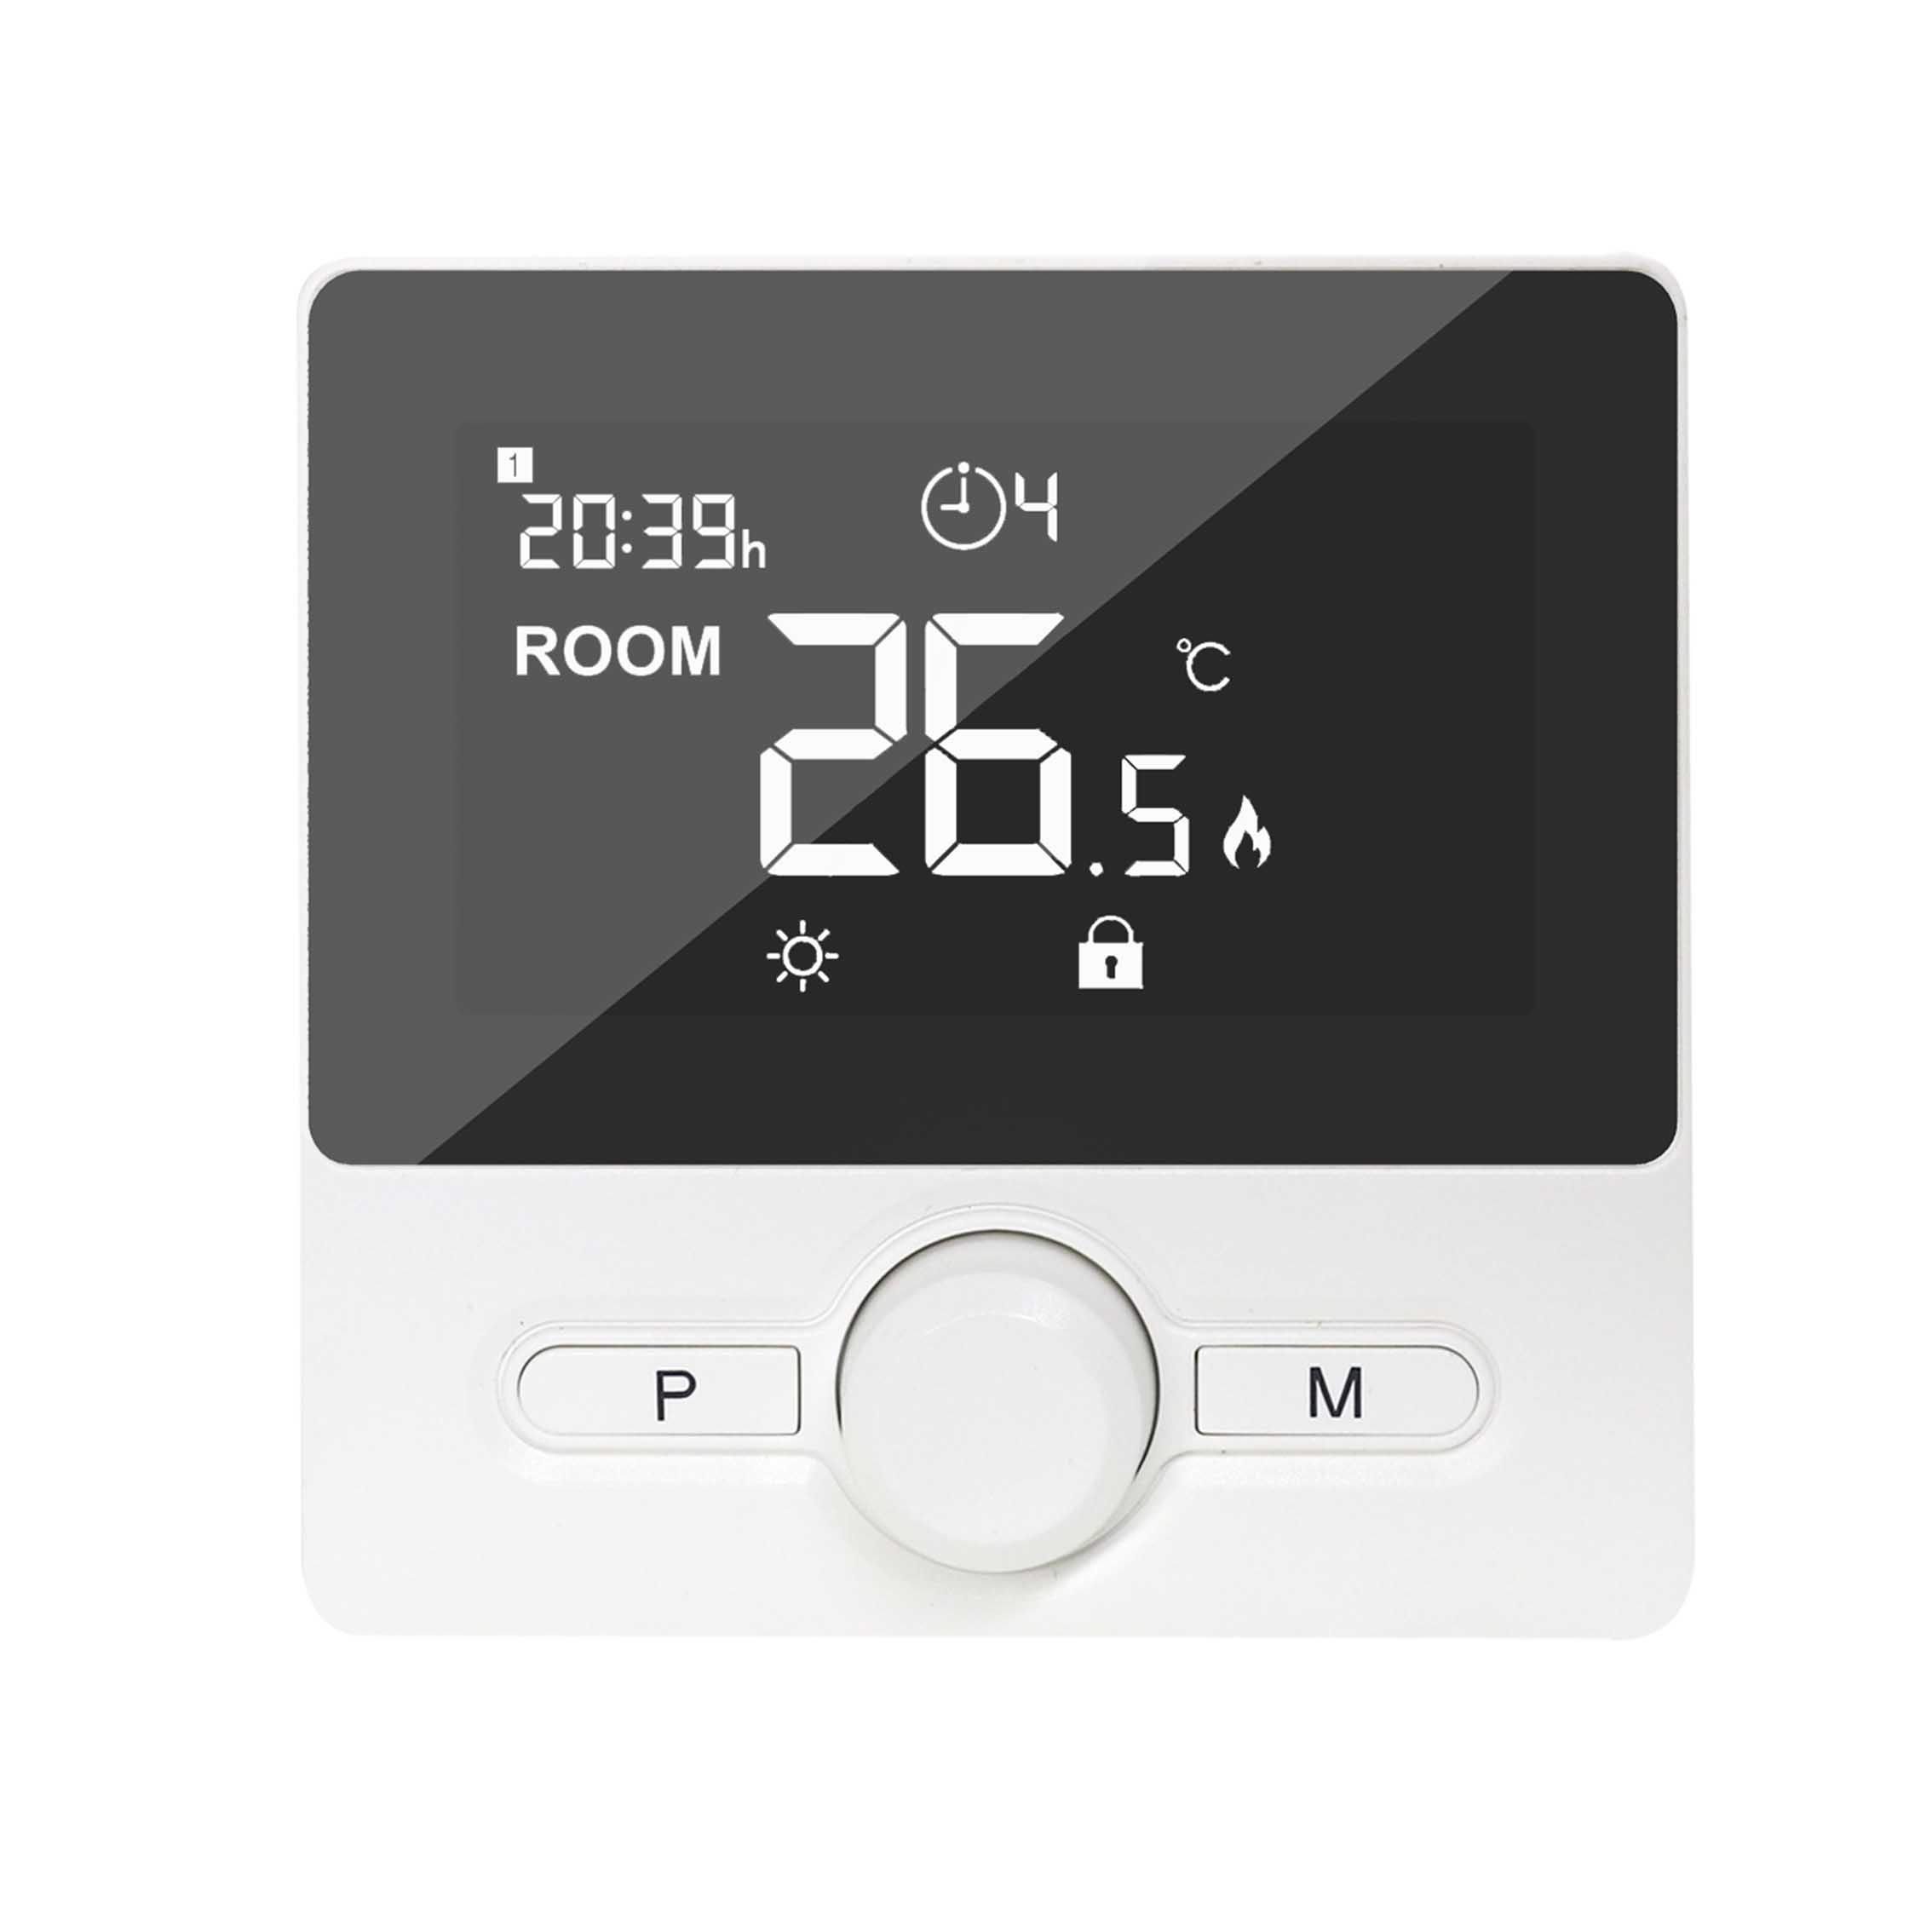 2*AAA Battery Power Boiler Thermostat